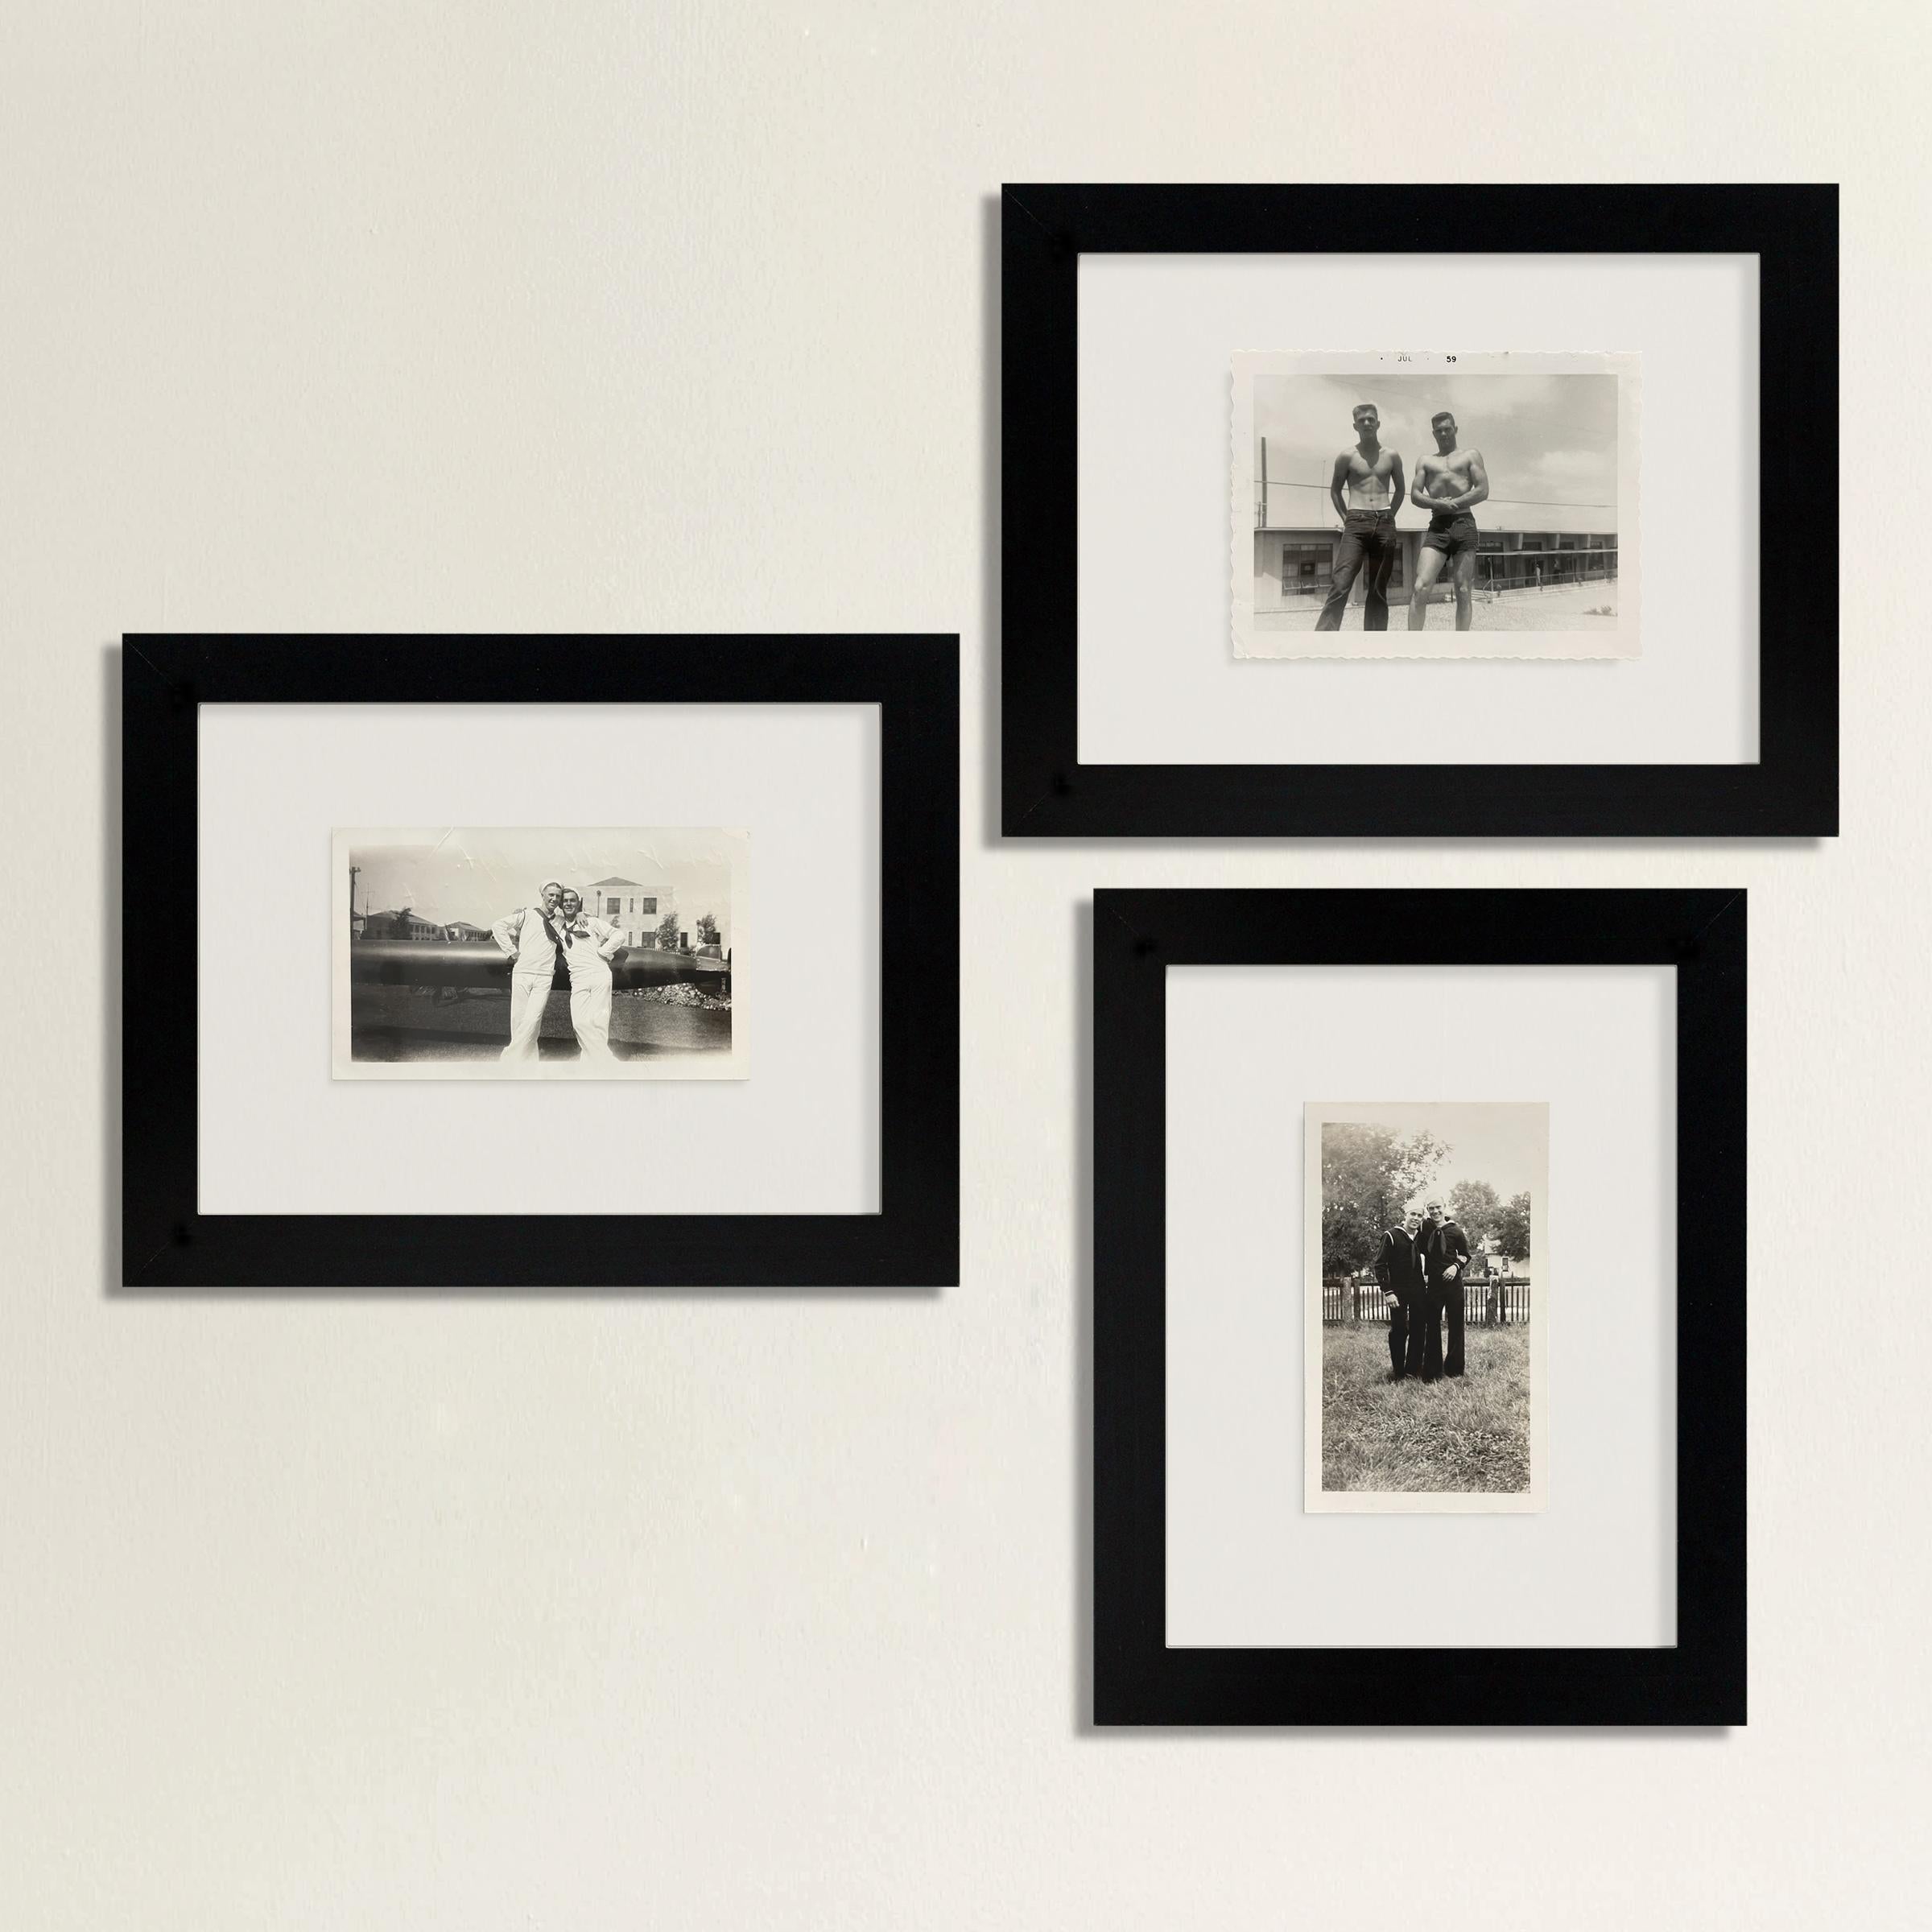 A heartwarming collection of three framed photographs depicting pairs of American soldiers, some in uniform and some flexing their muscles, but all charming and handsome. The photographs are framed with a simple black gallery frame and between two